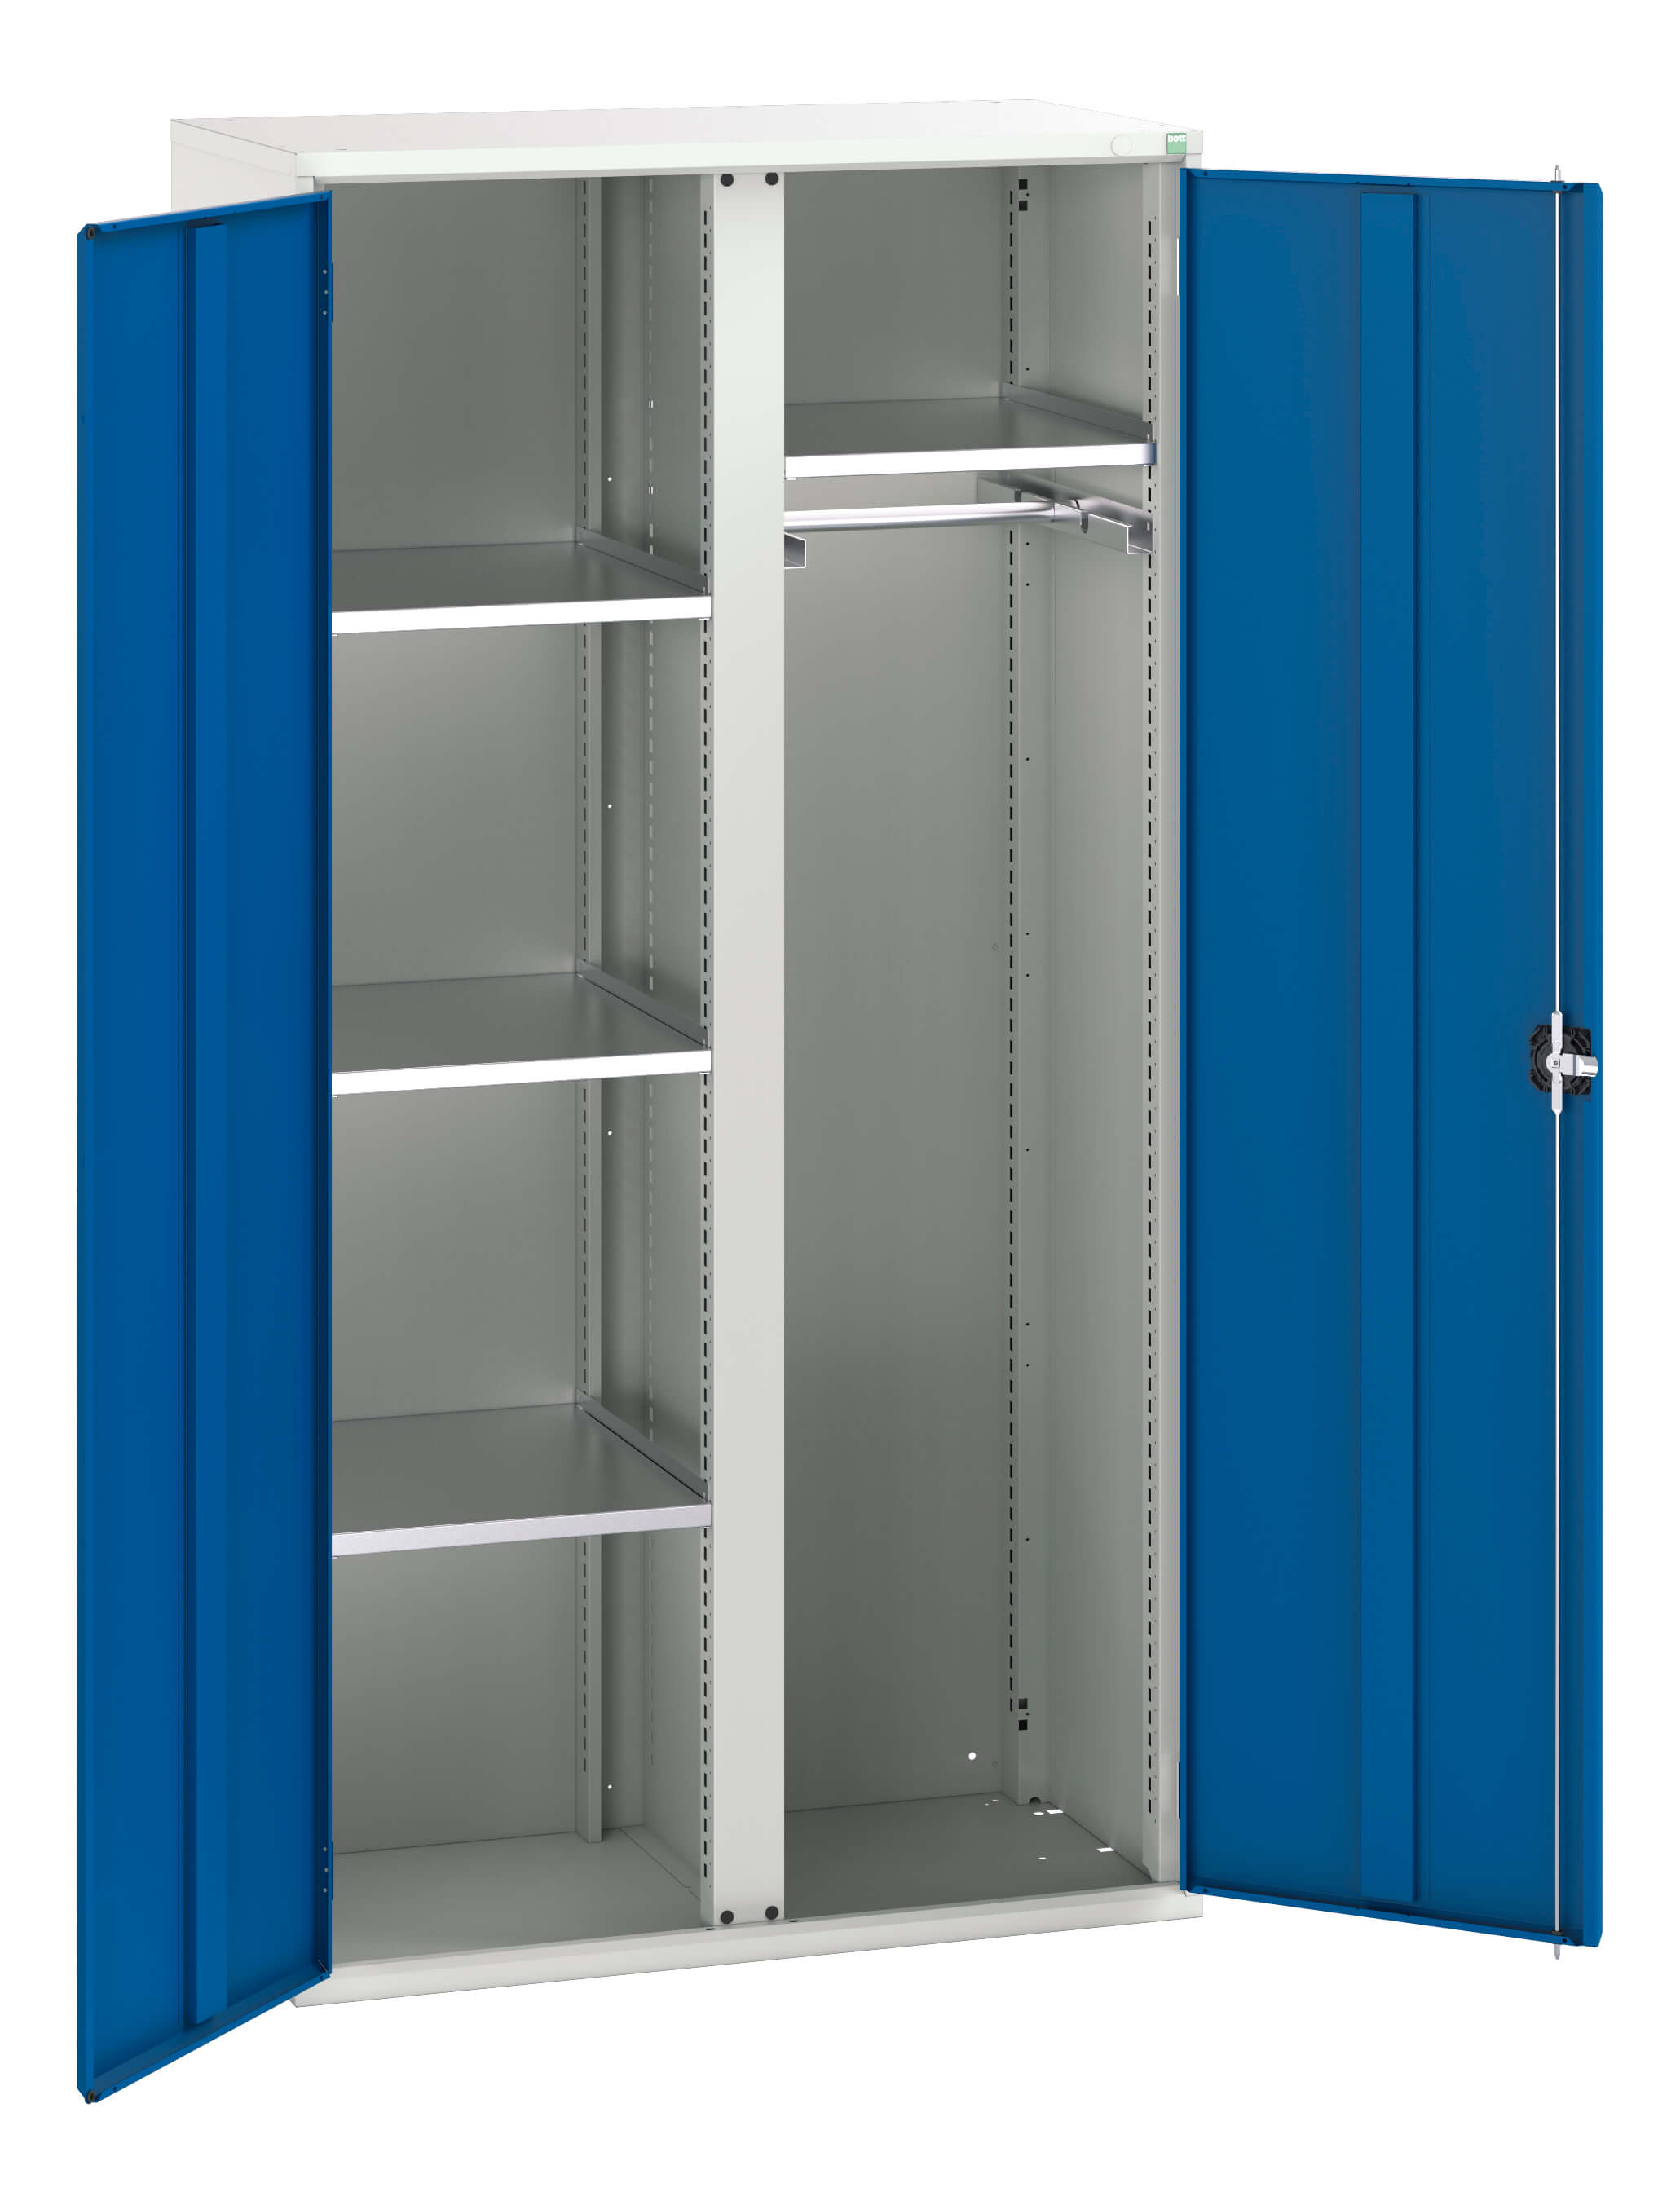 Bott Verso Ppe / Janitorial Kitted Cupboard With Vertical Partition - 16926579.11